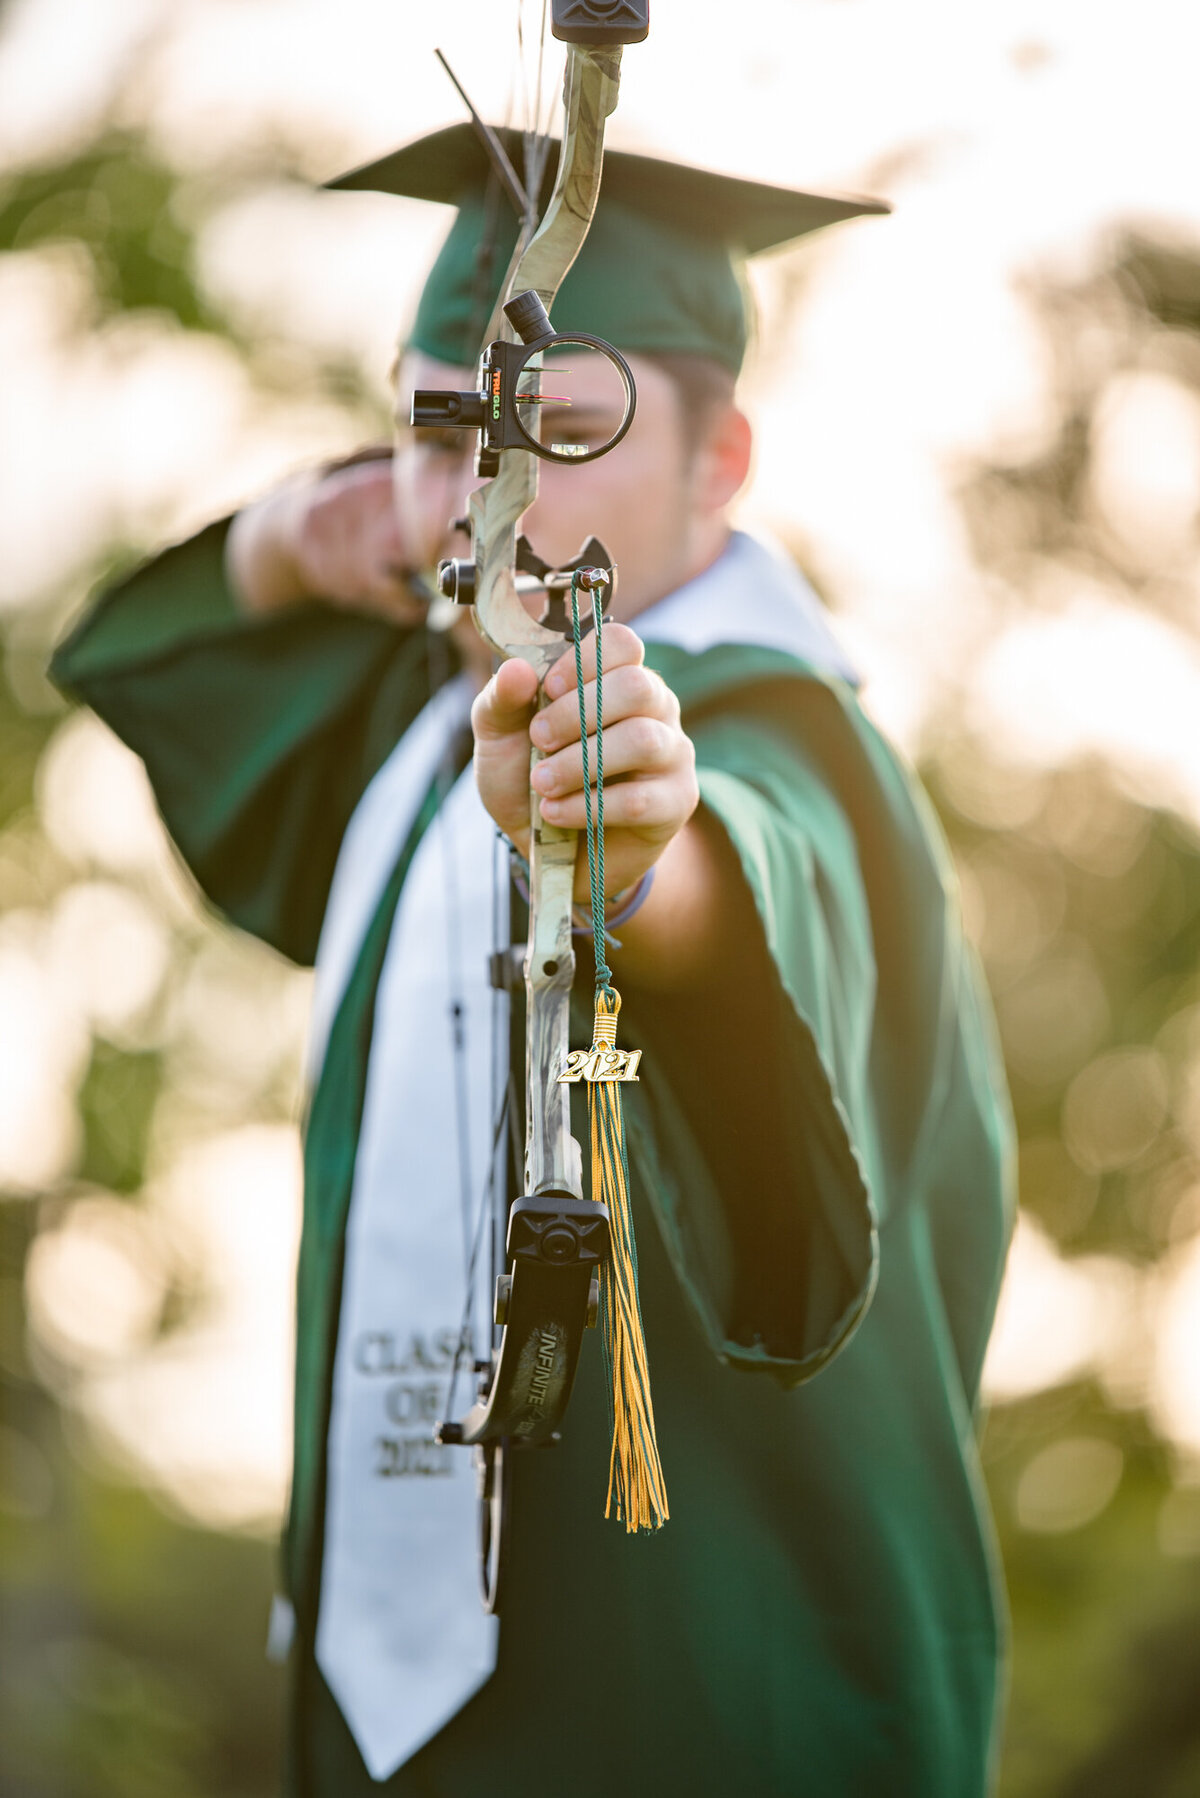 A Santa Fe High School senior wears his cap and gown while balancing his tassel on his bow and arrow.